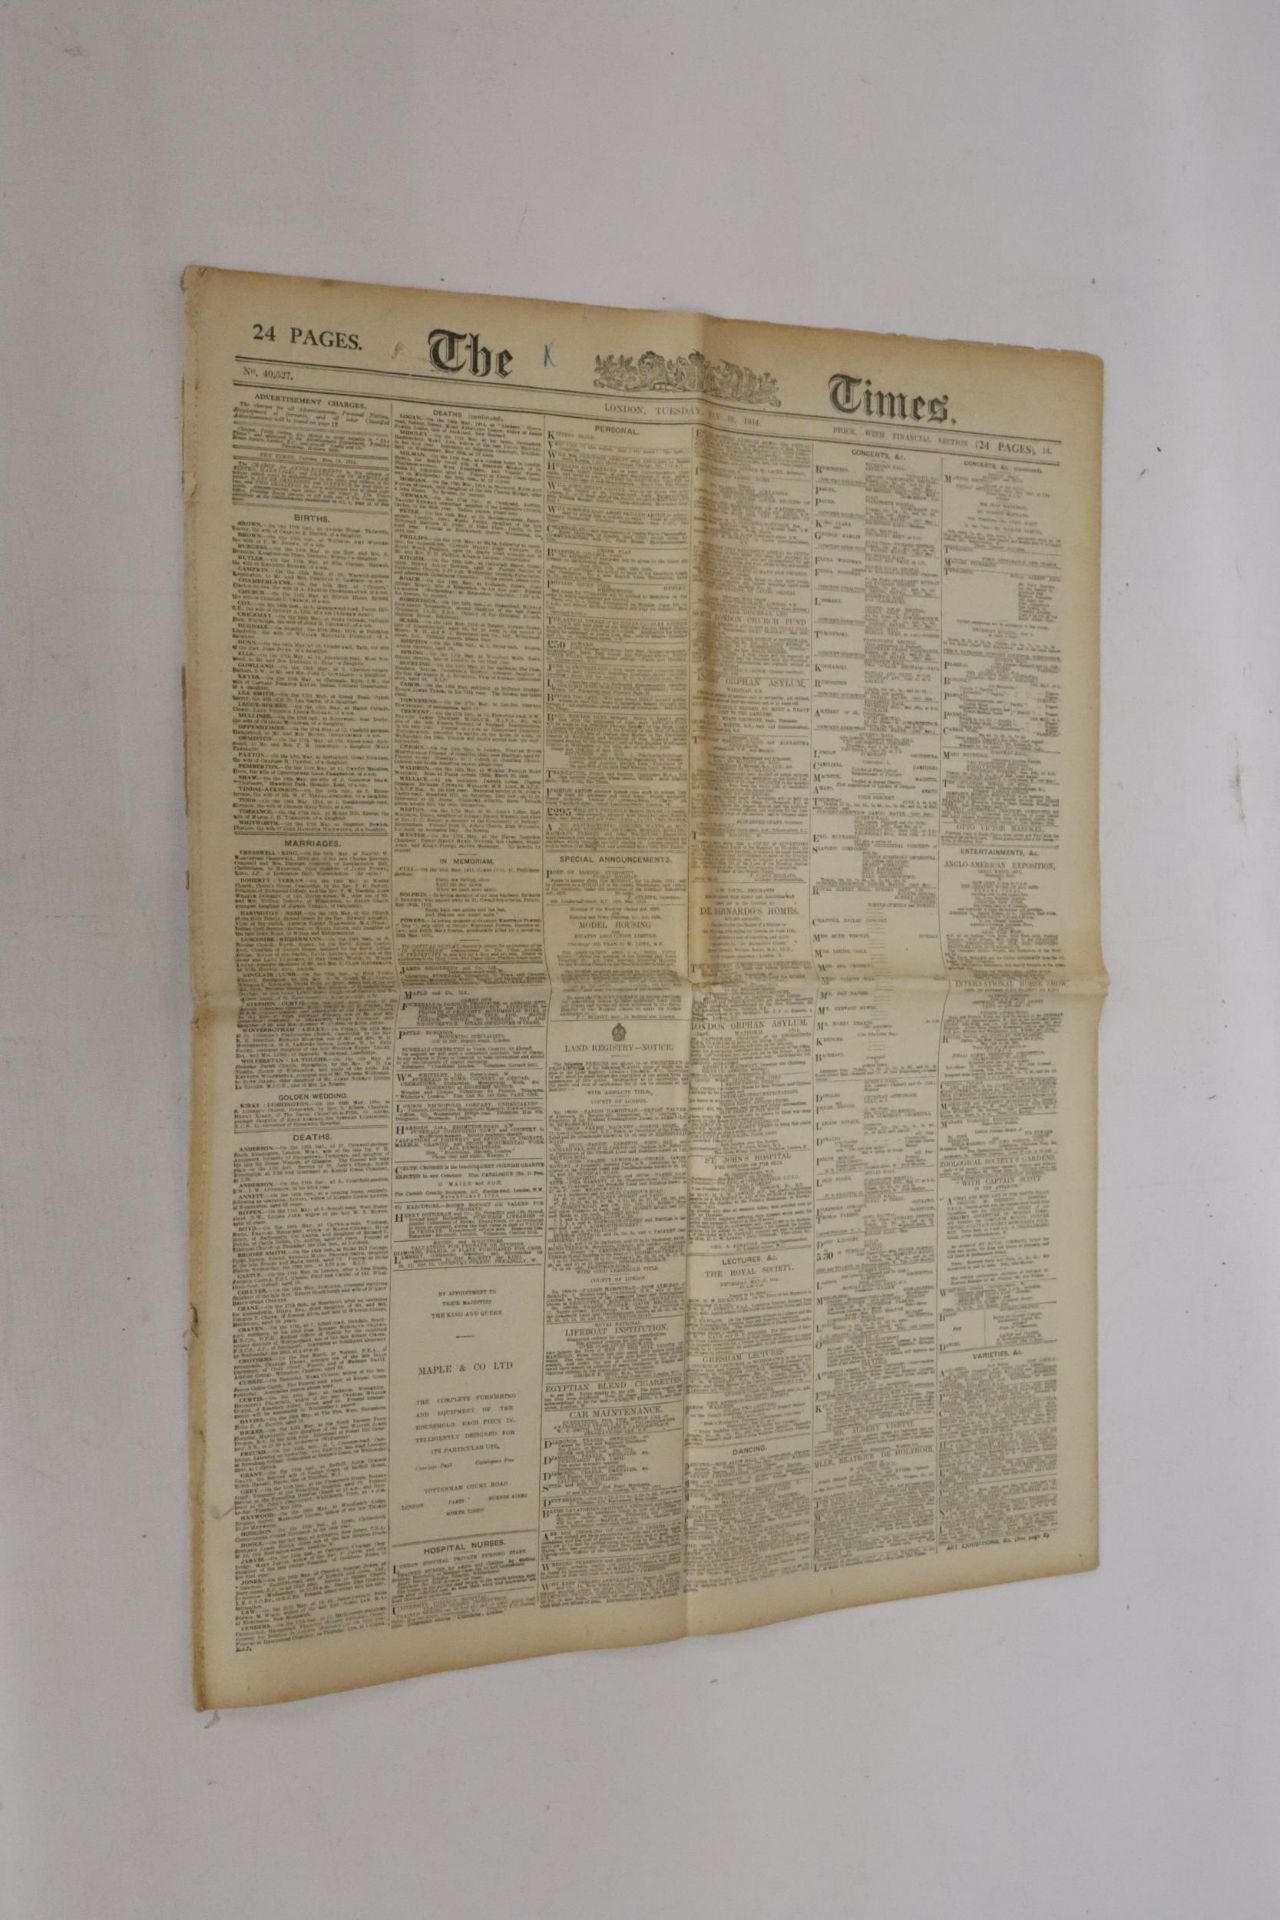 A VINTAGE 'THE TIMES' NEWSPAPER DATED TUESDAY, MAY 19, 1914